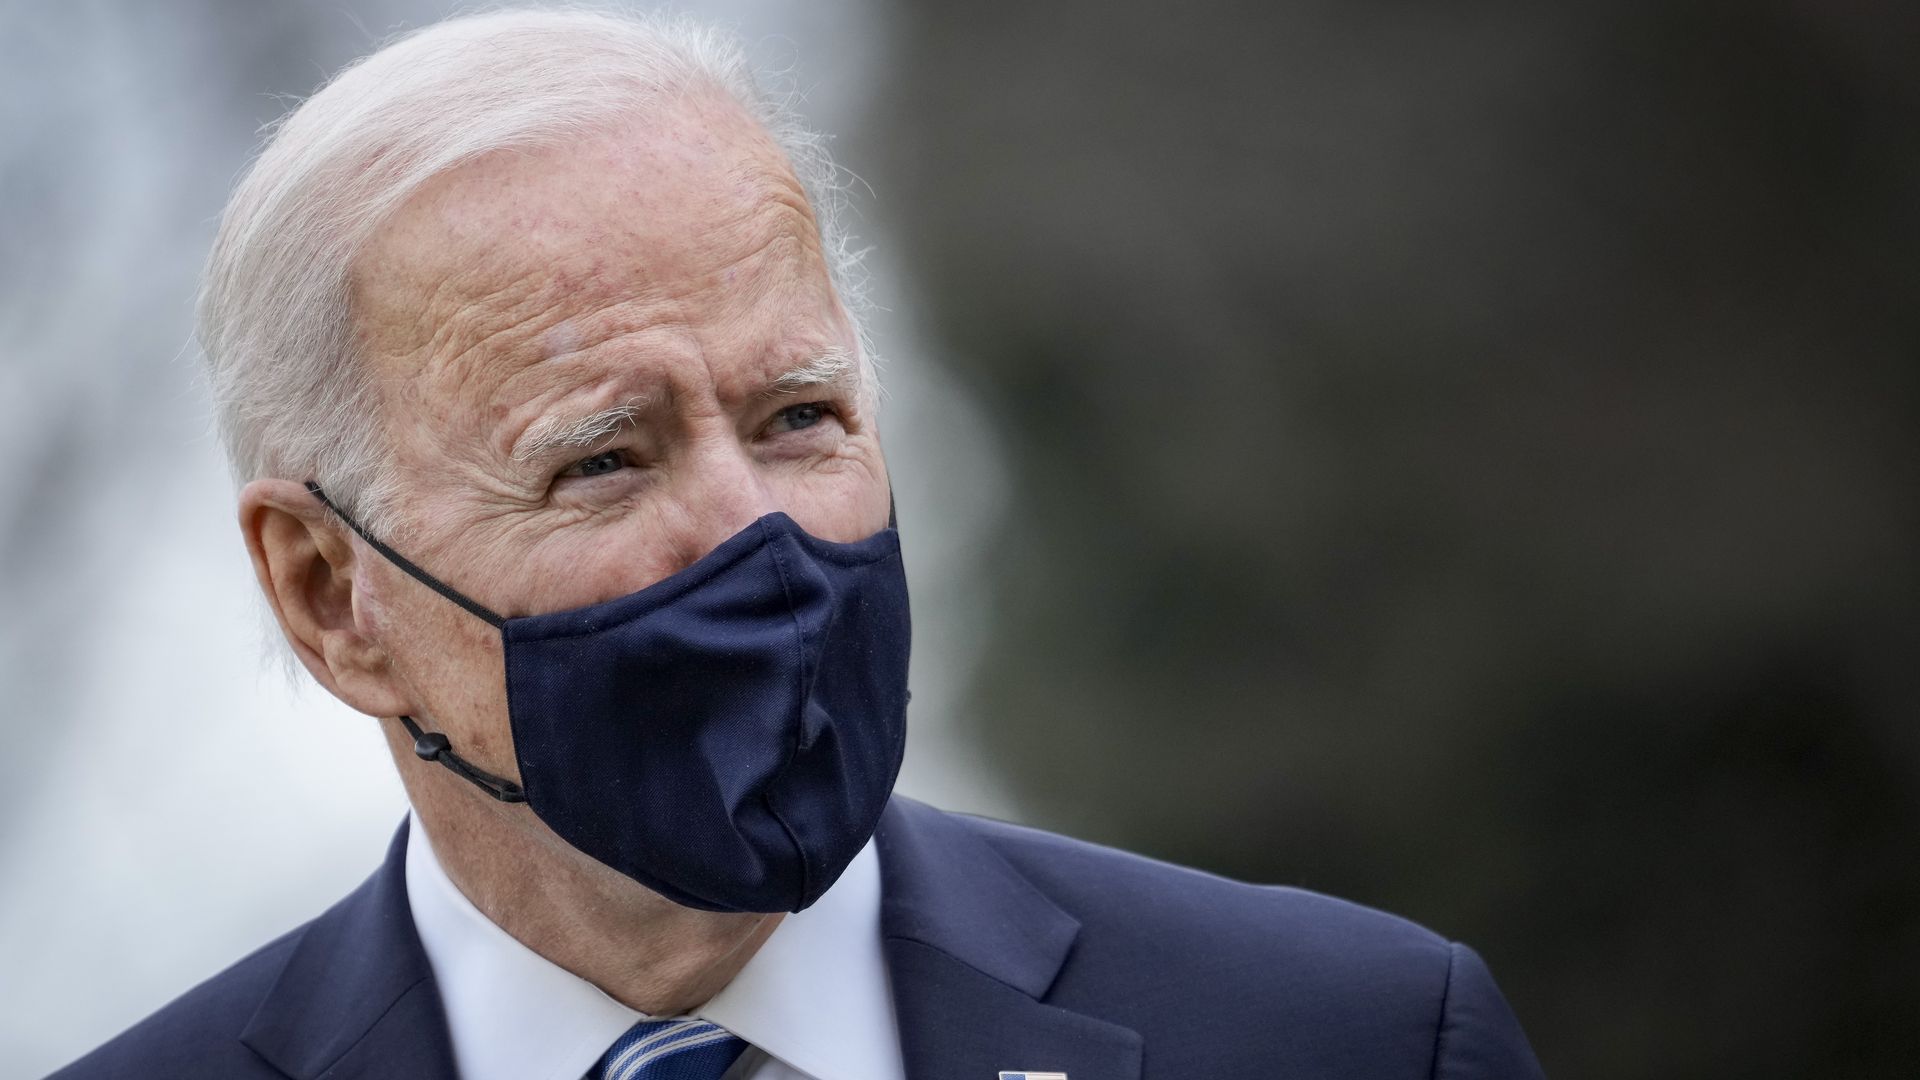 Photo of Biden's face with a mask